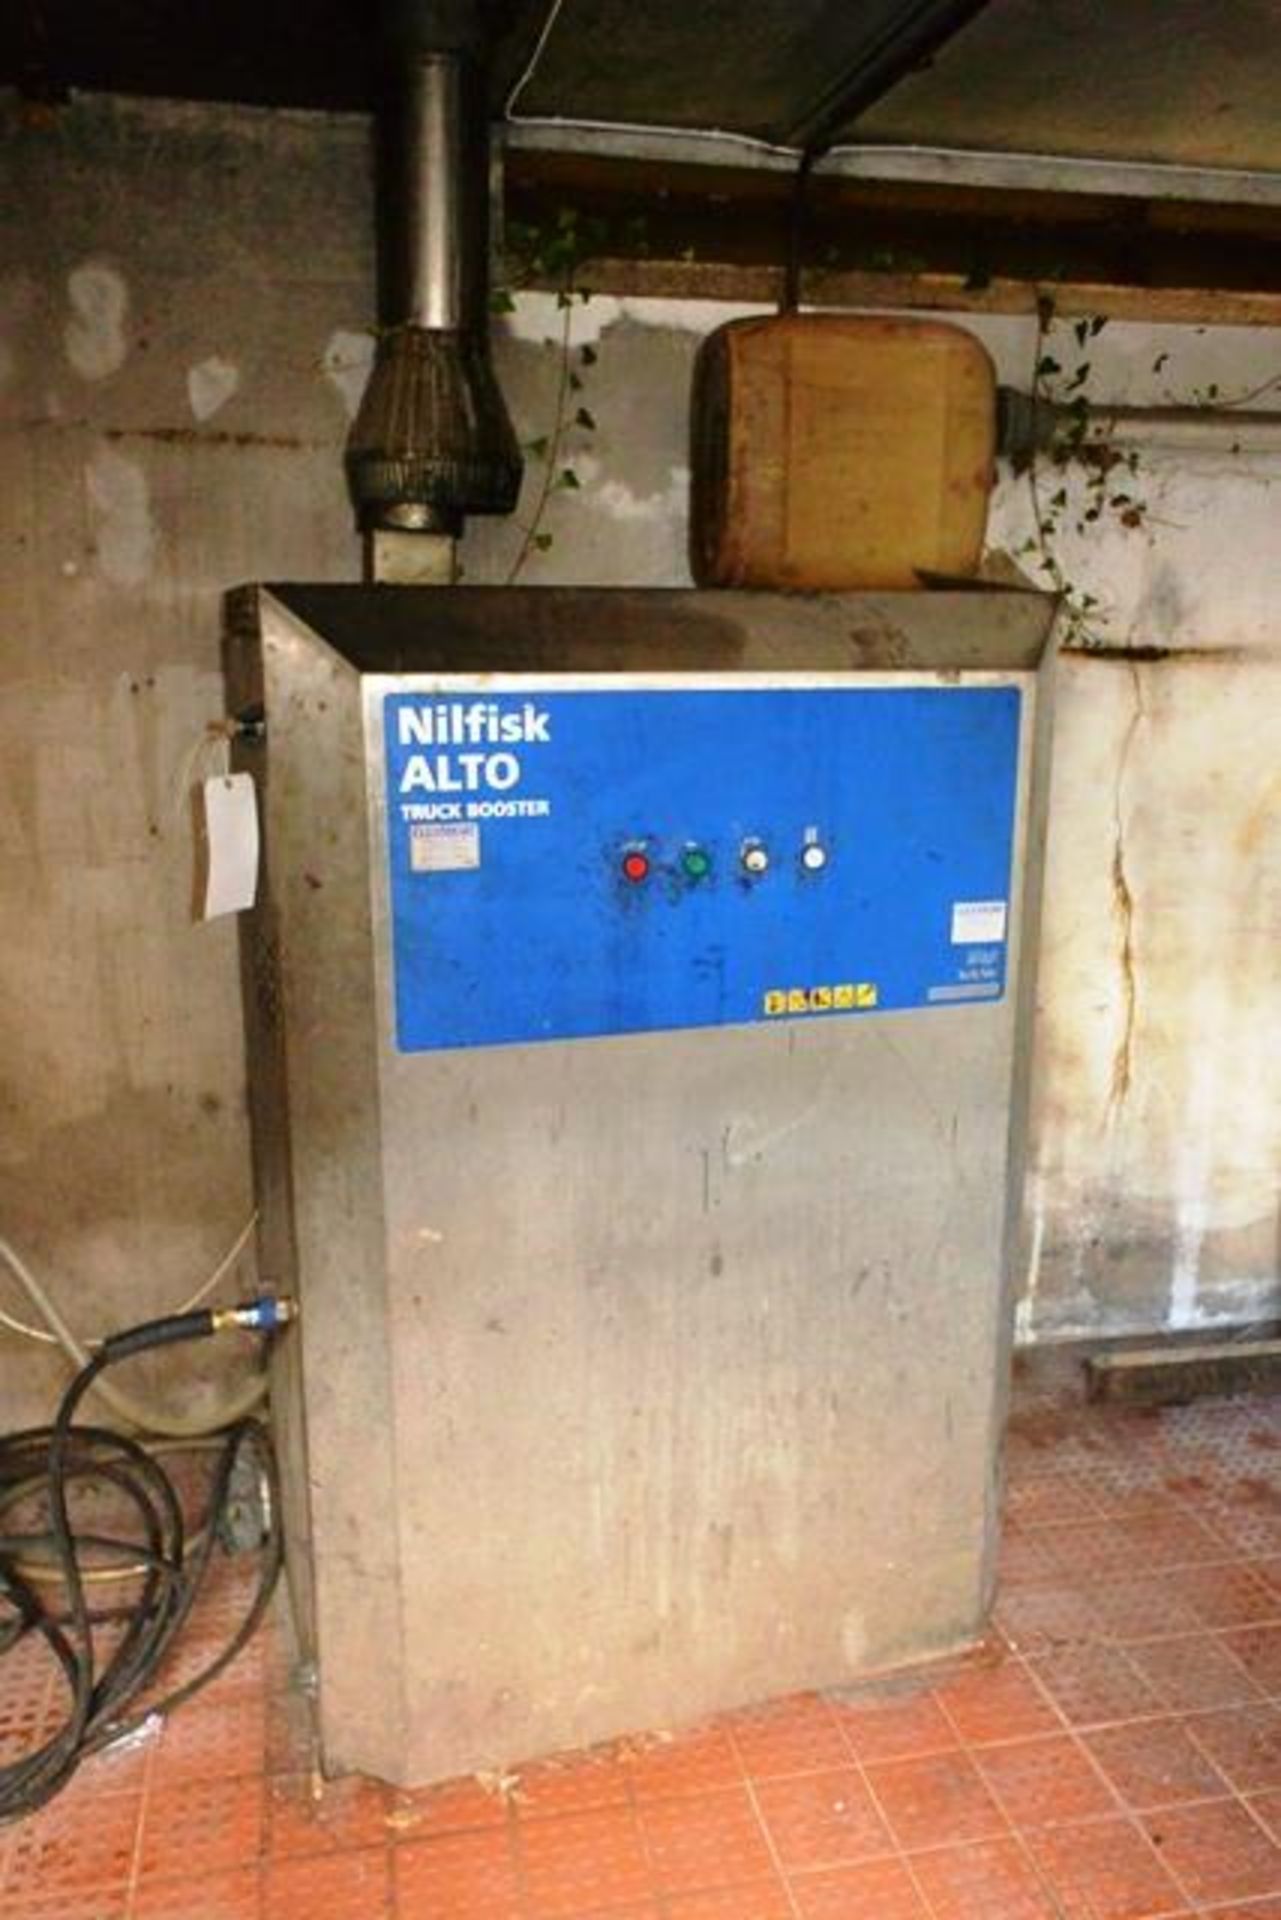 Nilfisk Alto truck booster pressure washer, serial no. 107370830, with hose (Please note: A work